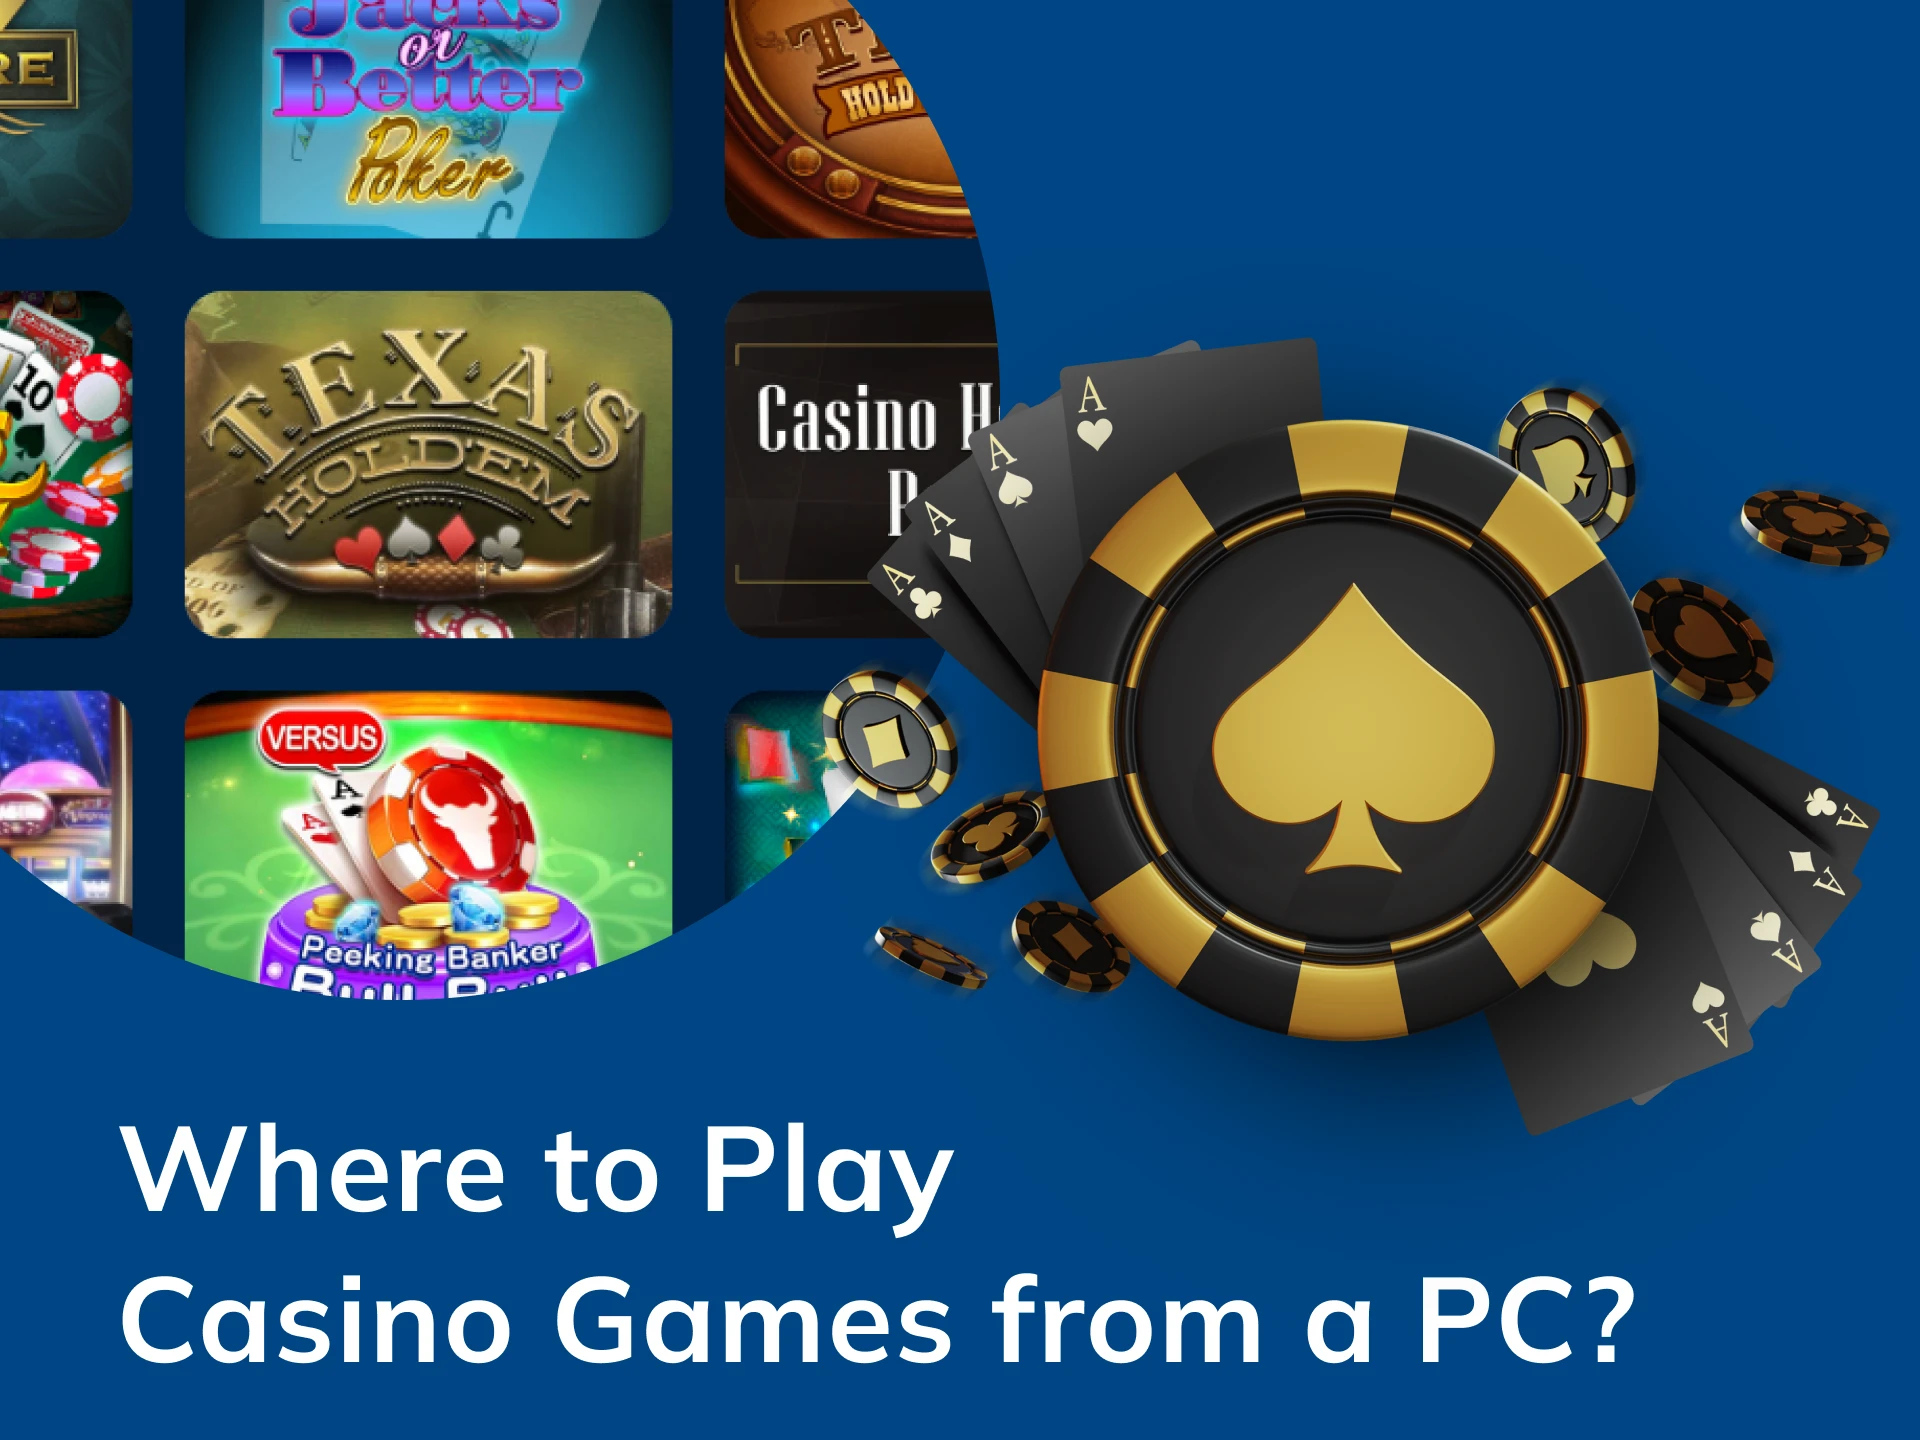 Choose your favourite casino and play through your browser or software.